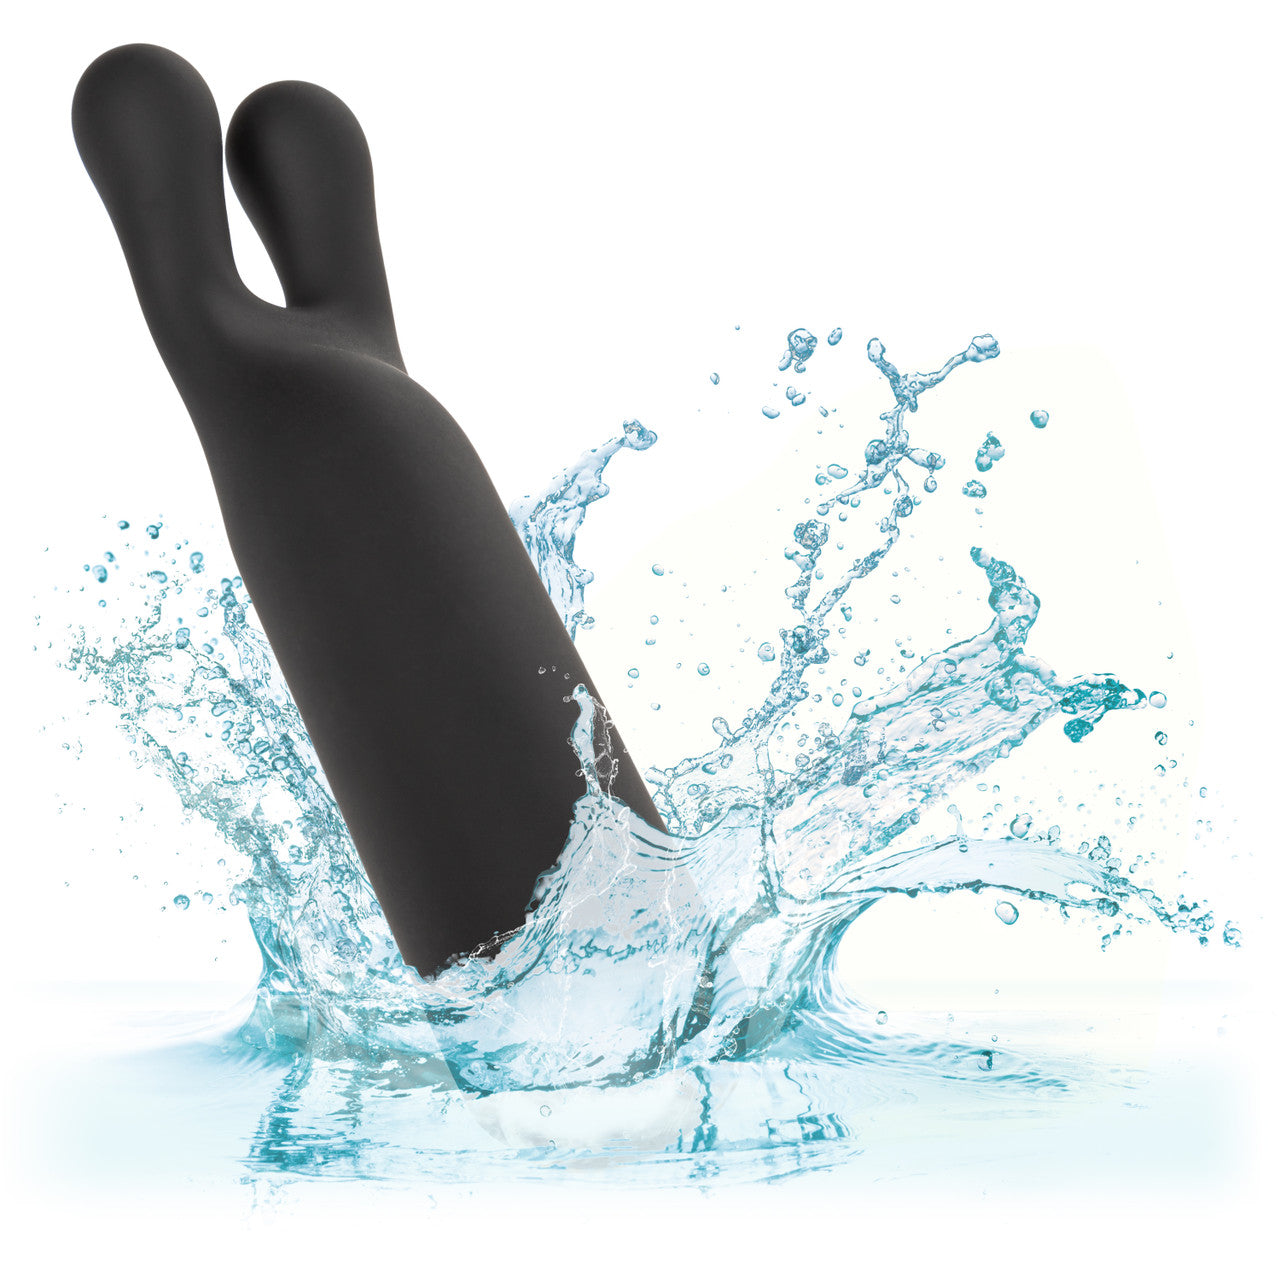 Raven Charmer Mini Massager - Thorn & Feather